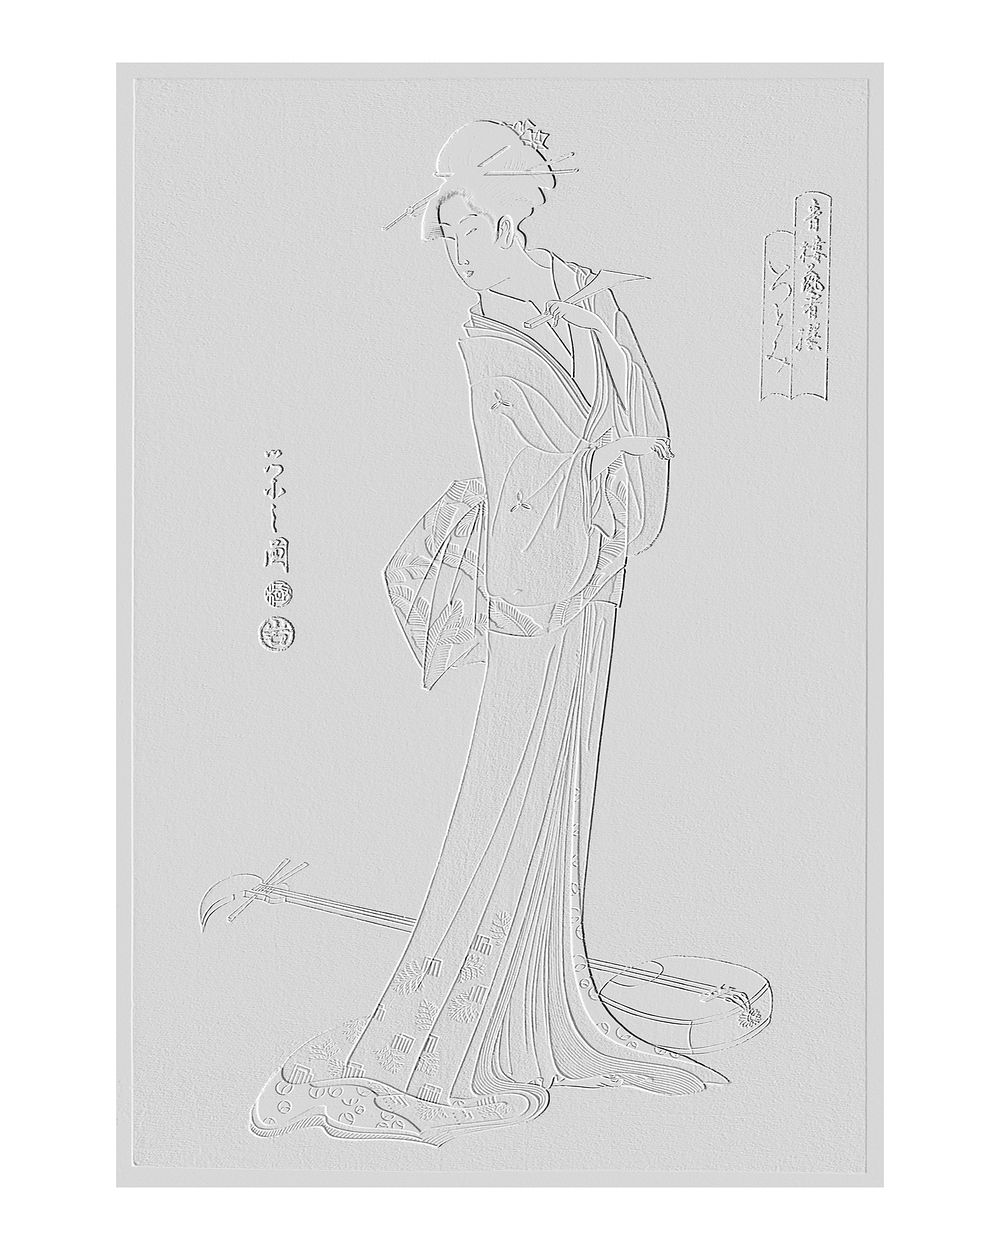 Japanese woman in kimono and a shamisen on the floor ukyio-e style vintage illustration wall art print and poster design…